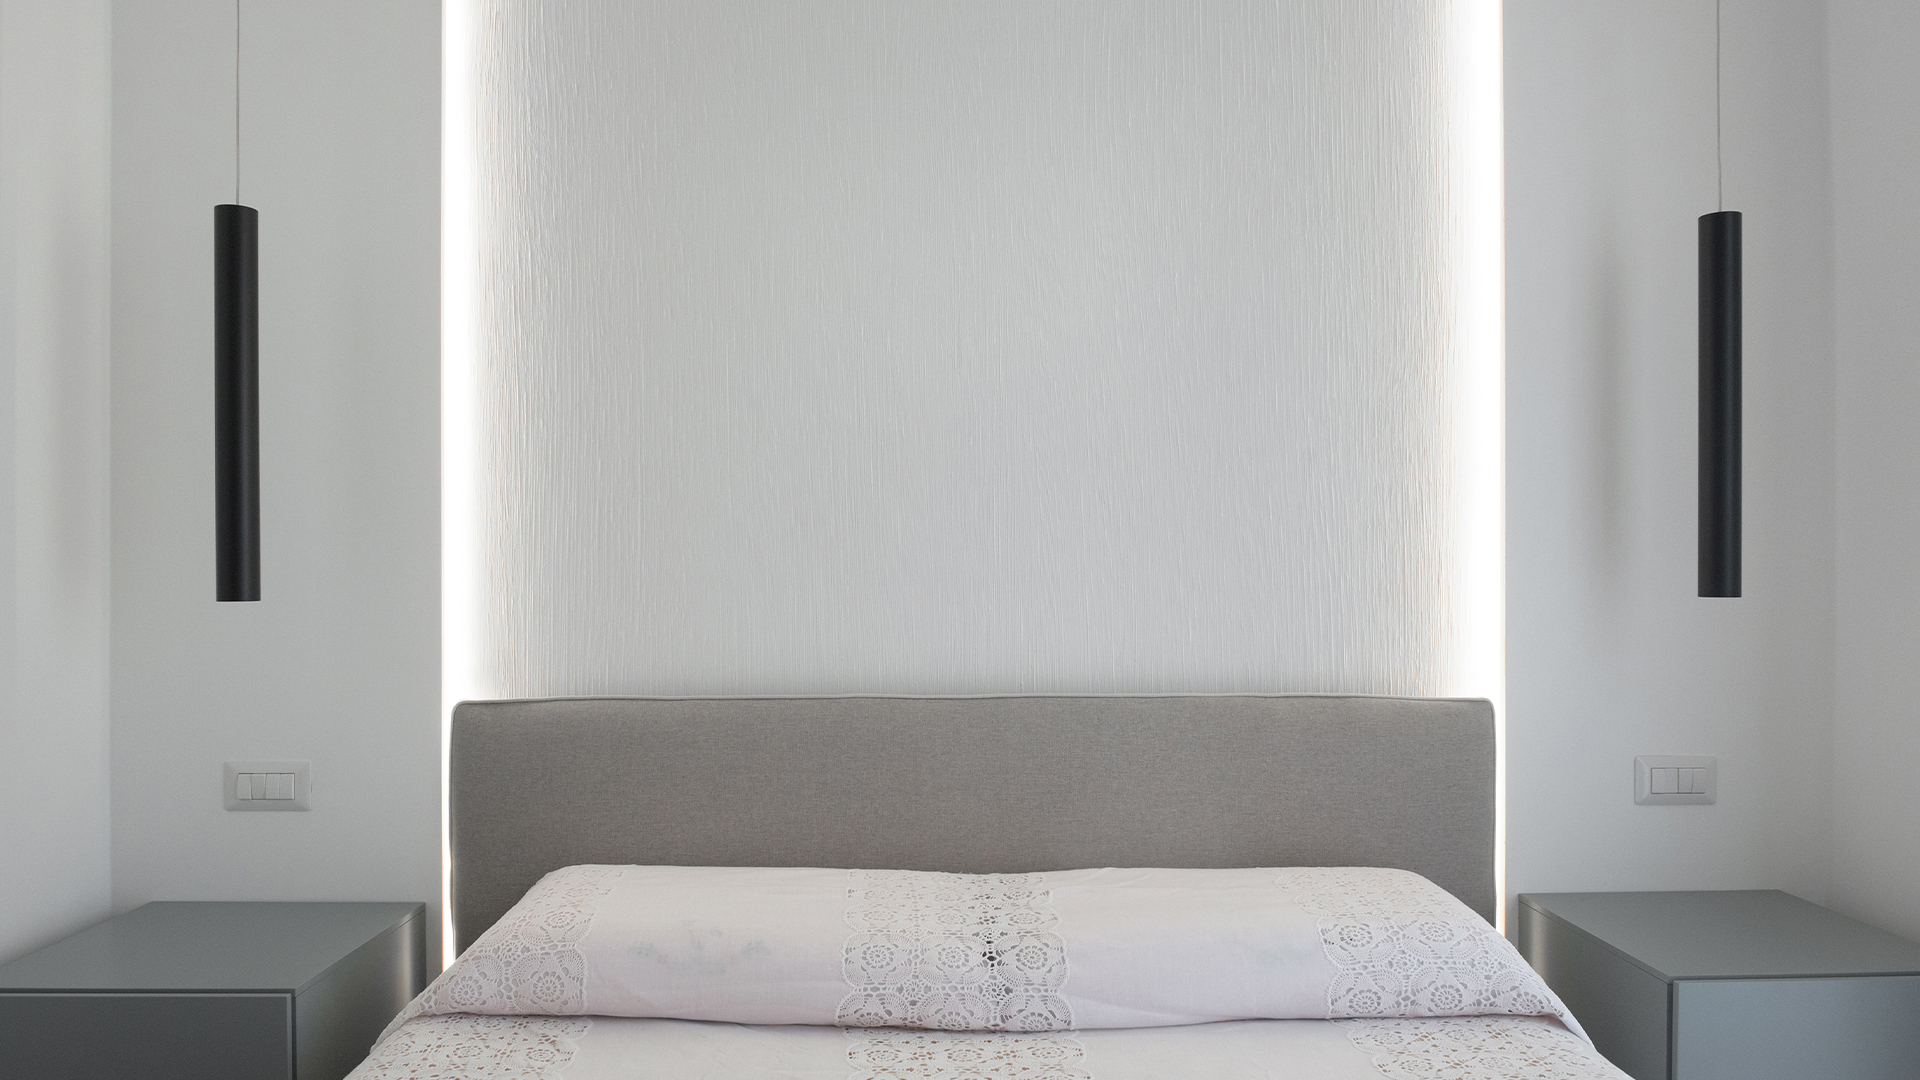 How to light the bedroom: some practical tips